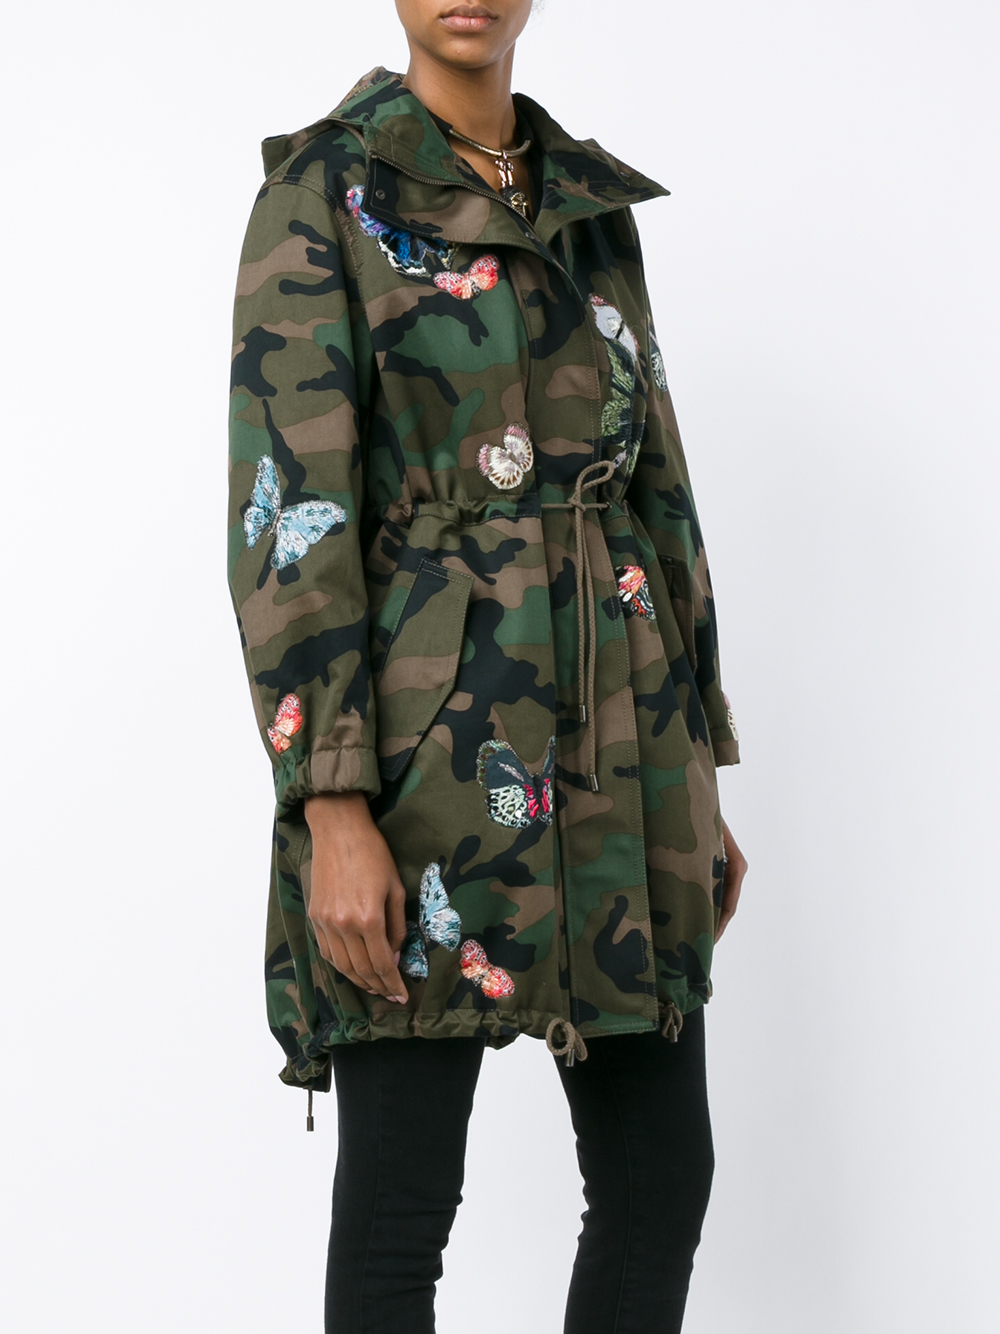 renere Let Ride Valentino Butterfly Embroidered Camouflage Parka Jacket | Lyst